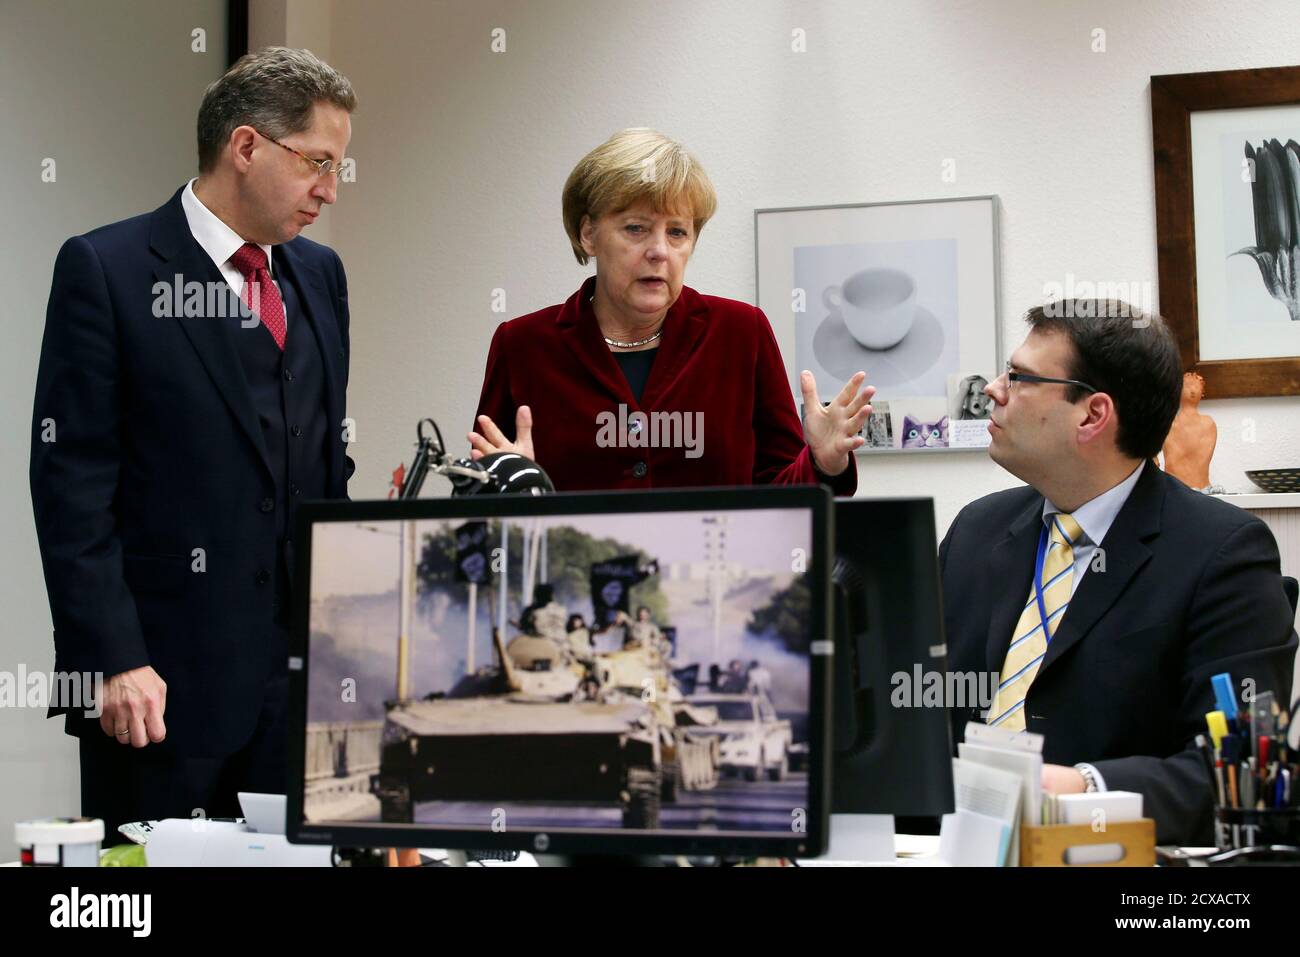 German Chancellor Angela Merkel (C) and Hans-Georg Maassen (L), President of Germany's Bundesamt fuer Verfassungsschutz (BfV), the domestic intelligence service of the Federal Republic of Germany, talk to an agent of the BfV in Cologne October 31, 2014.  The agent is specialized in World Wide Web investigations of Islamic extremism. REUTERS/Oliver Berg/Pool (GERMANY - Tags: POLITICS) Stock Photo